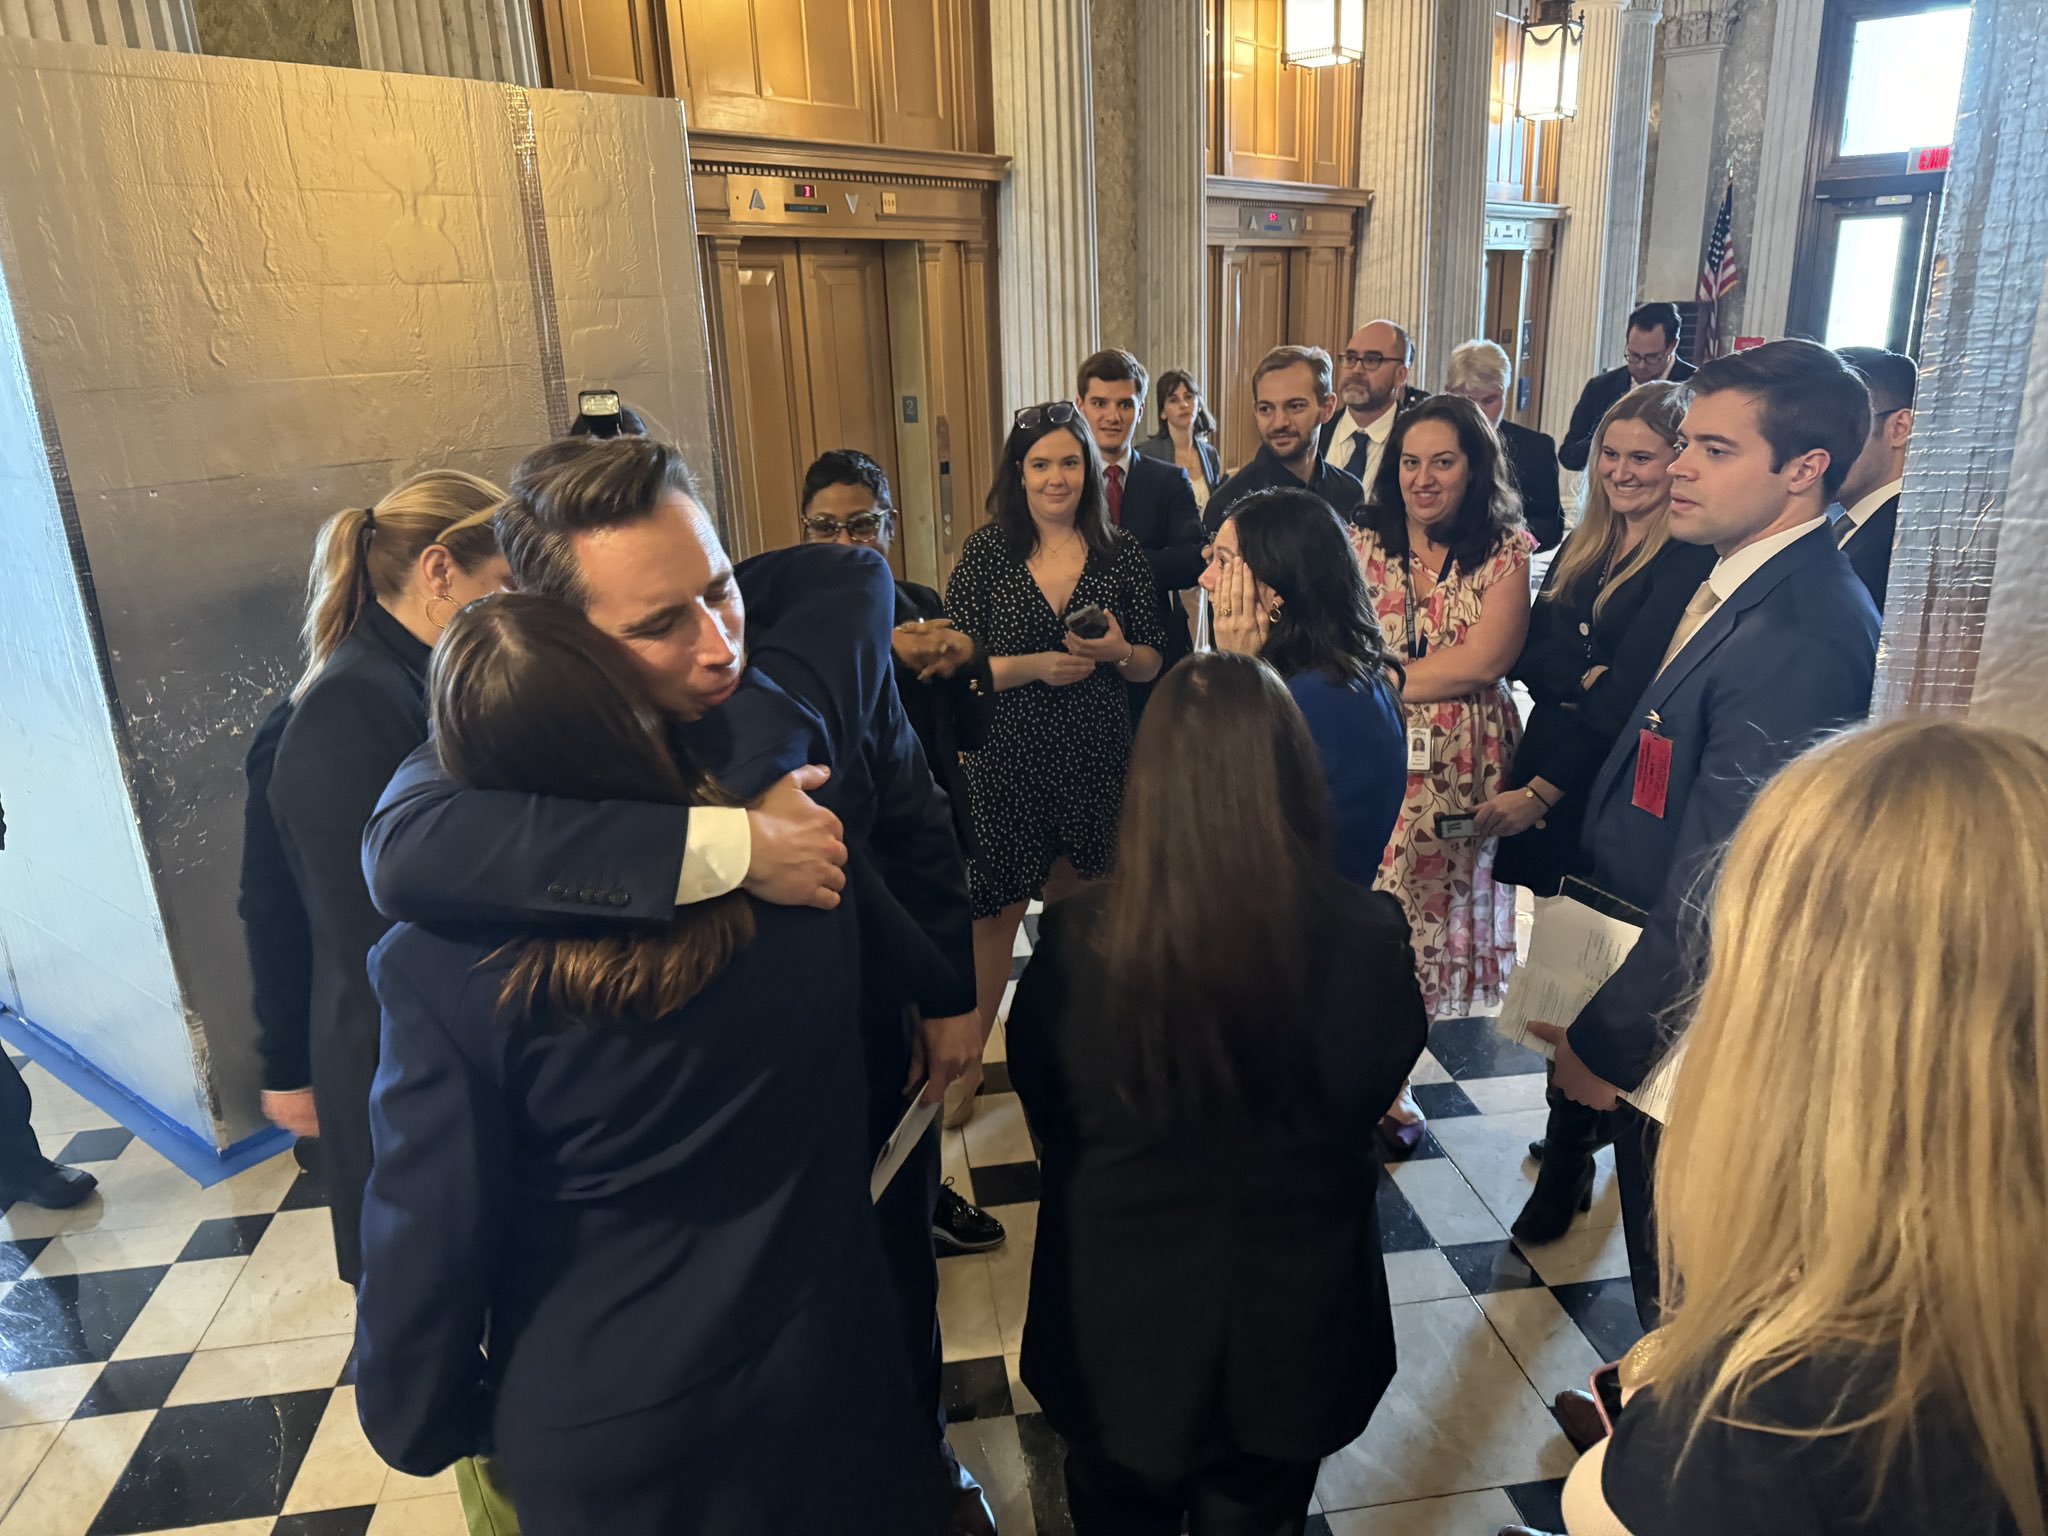 U.S. Sen. Josh Hawley, a Republican from Missouri, hugs radiation compensation fund supporters after a Senate vote to expand the program on March 7. (Alan He / CBS News)